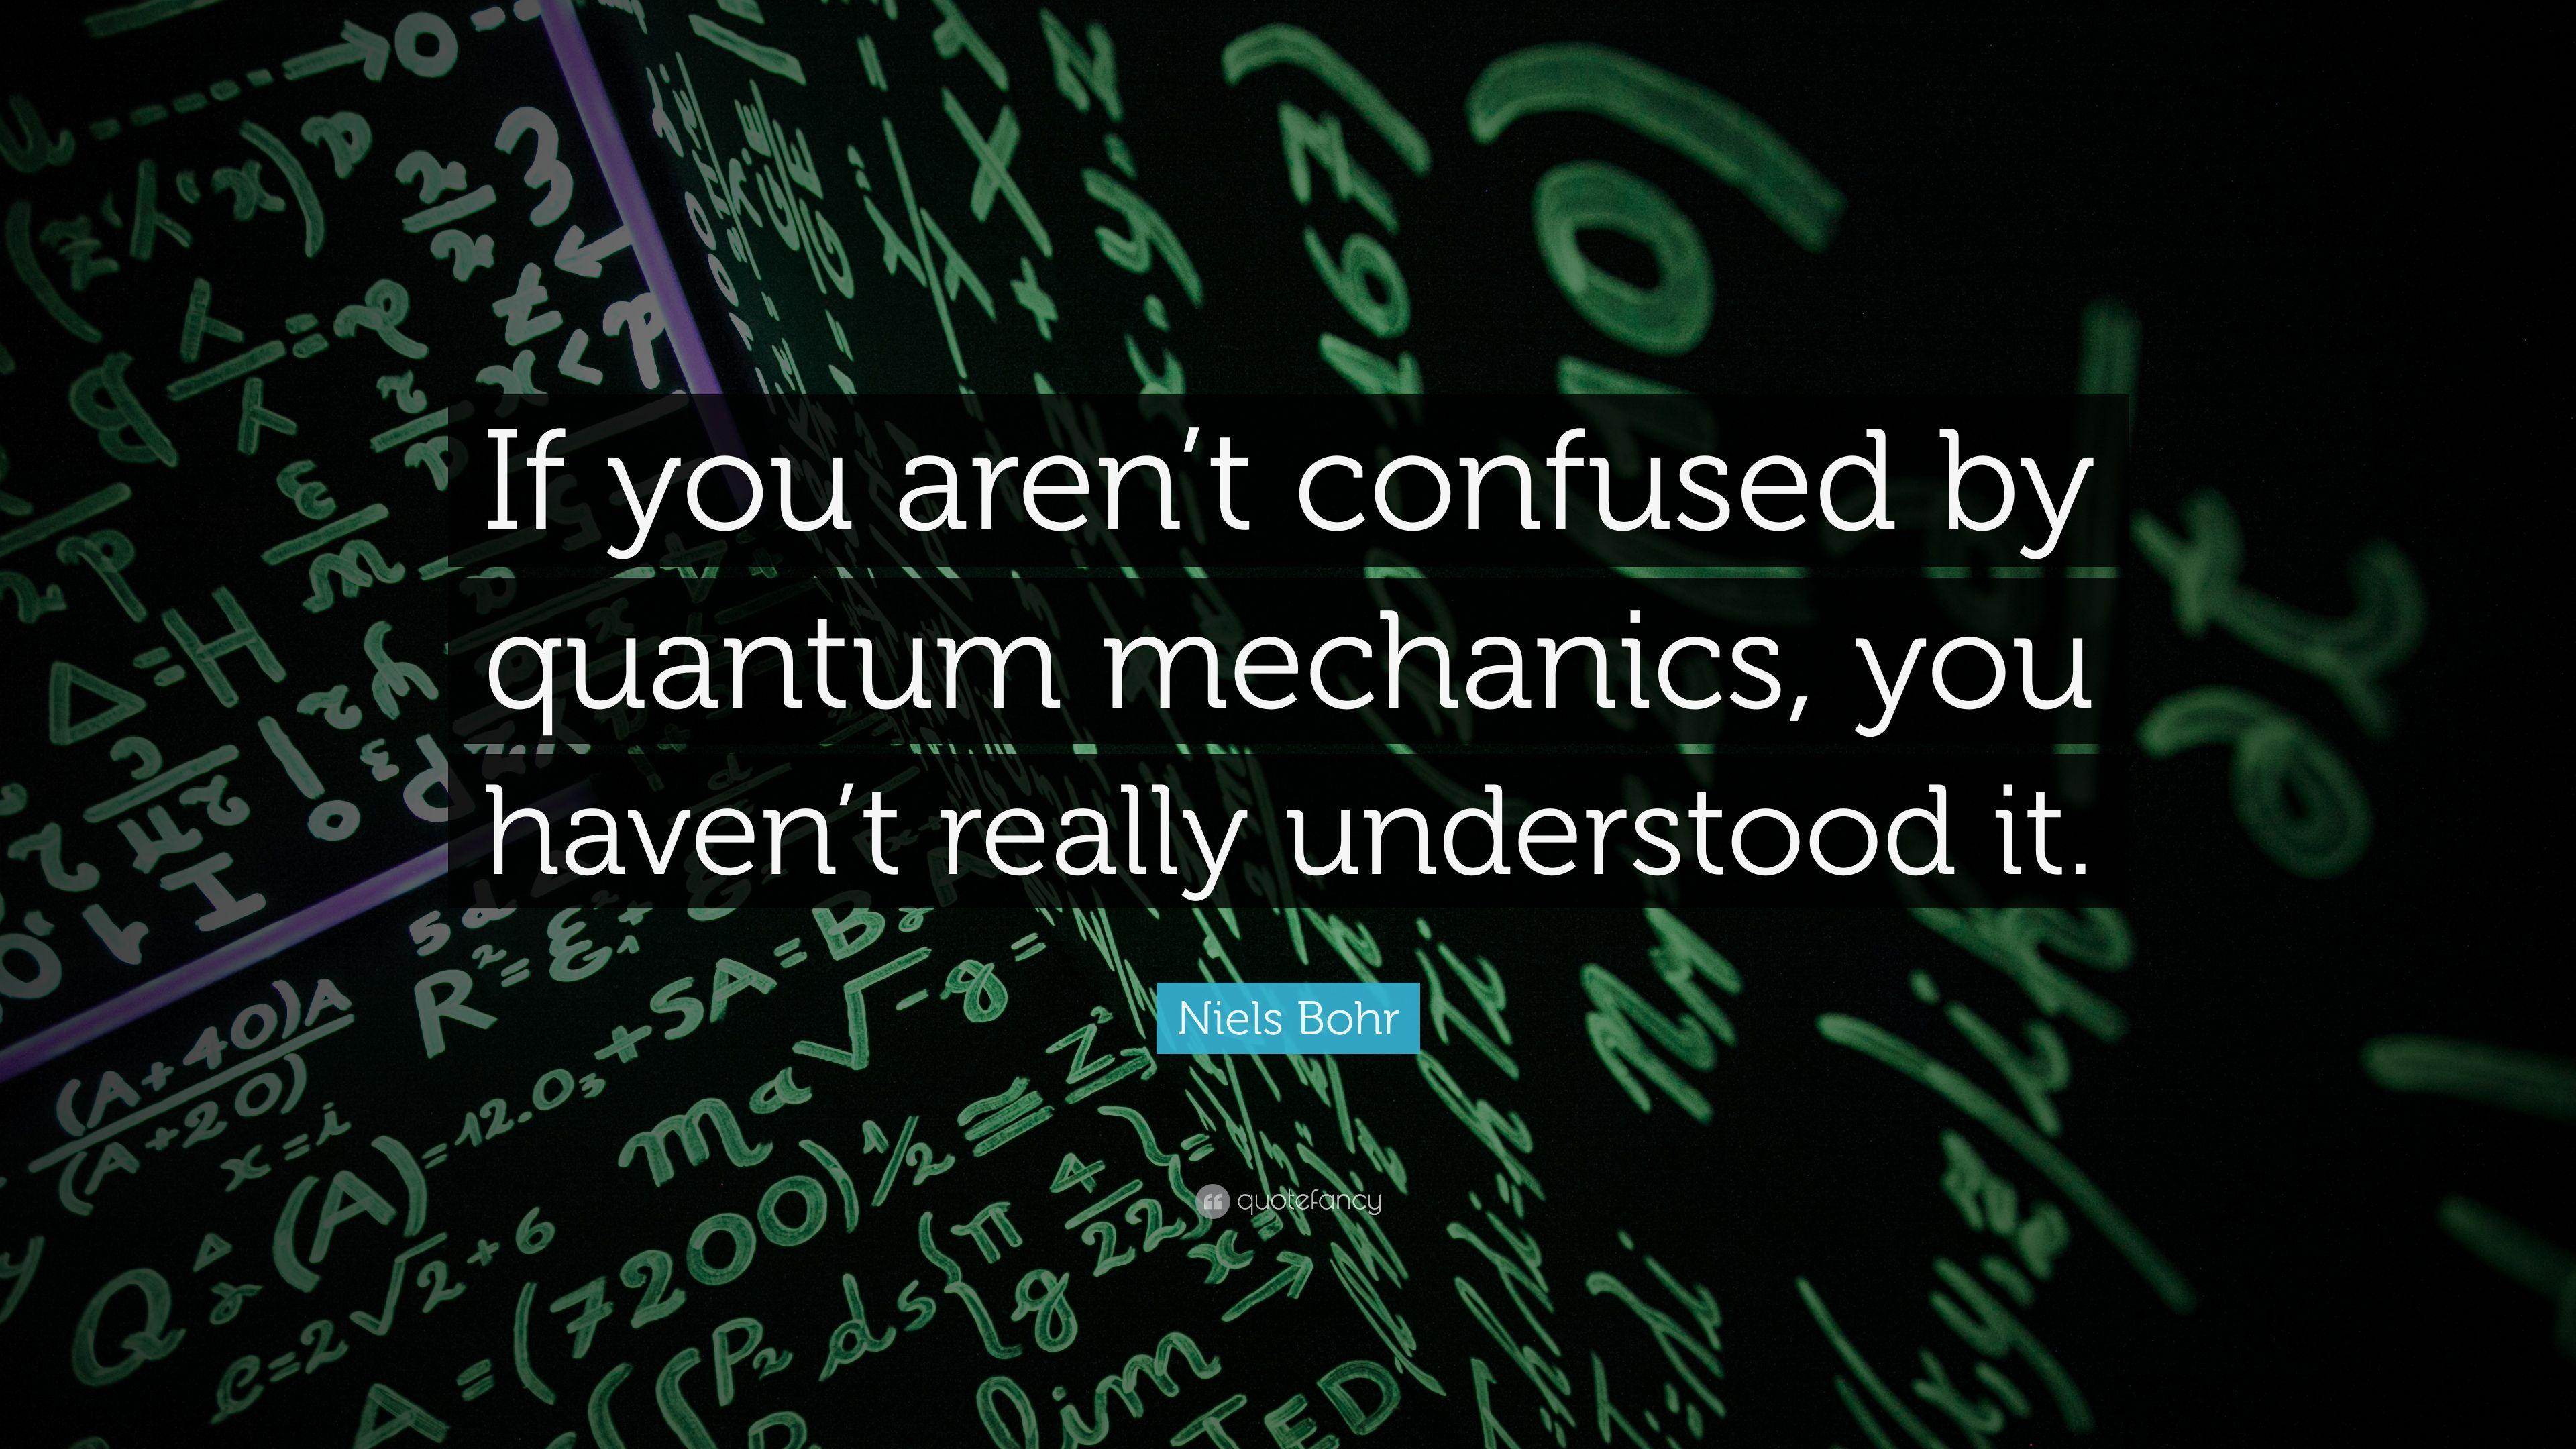 Niels Bohr Quote: “If you aren't confused